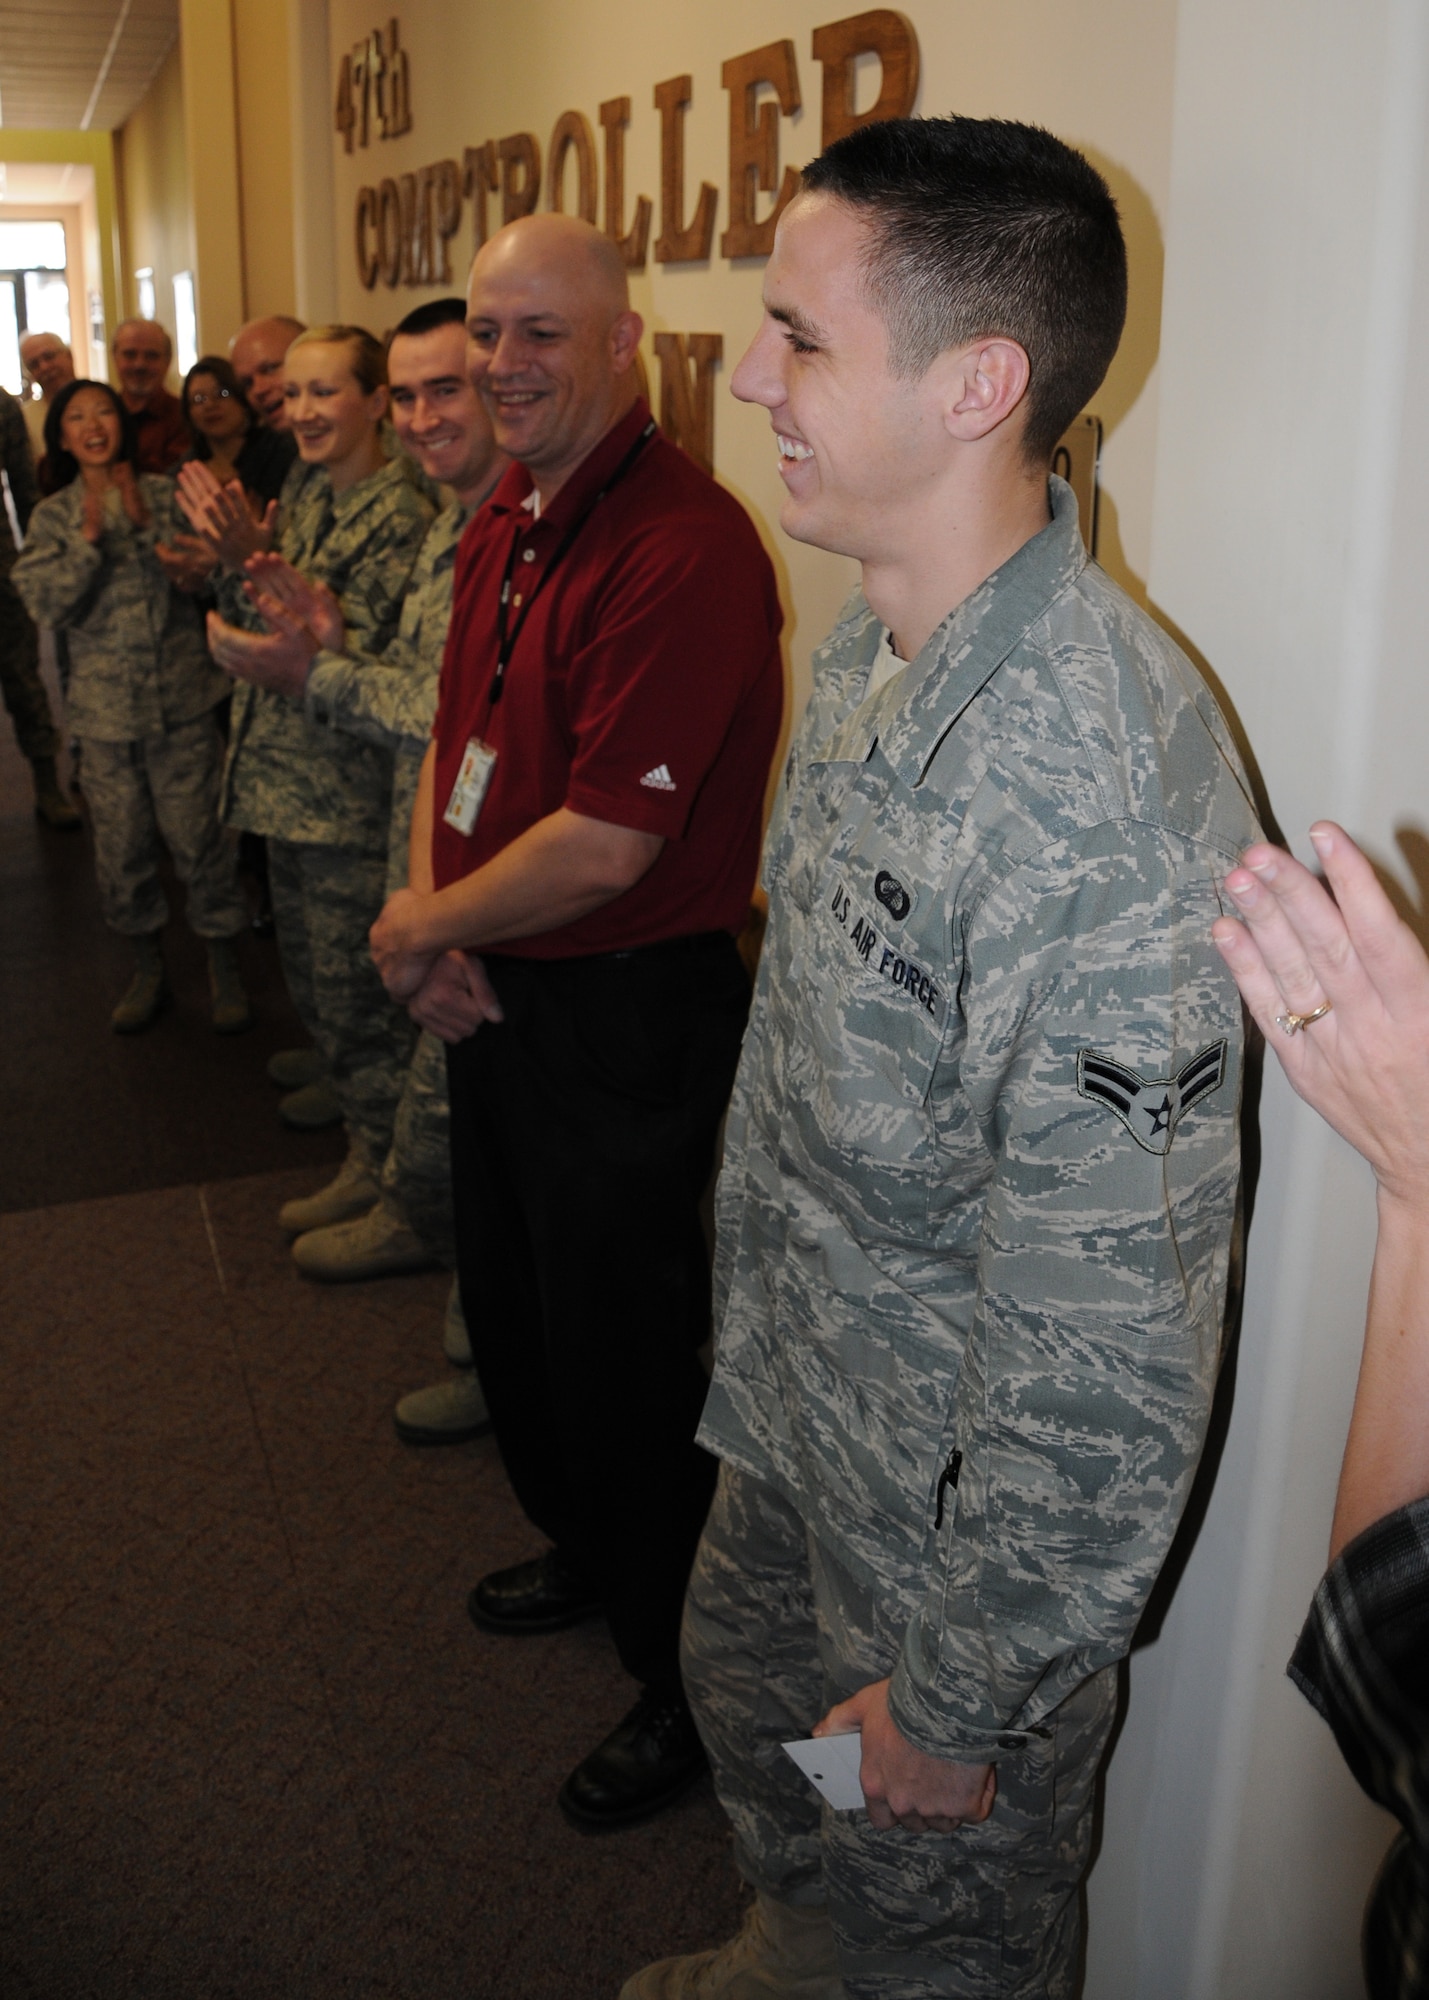 LAUGHLIN AIR FORCE BASE, Texas – Airman 1st Class Tyler Sumrall, 47th Comptroller Squadron, is applauded after being notified that he had been awarded a college scholarship through the Airman Scholarship Commissioning Program. Airman Sumrall will attend Arizona State University and study political science while participating in ASU’s Reserve Officer Training Corp program. (U.S. Air Force photo by Airman 1st Class Blake Mize)